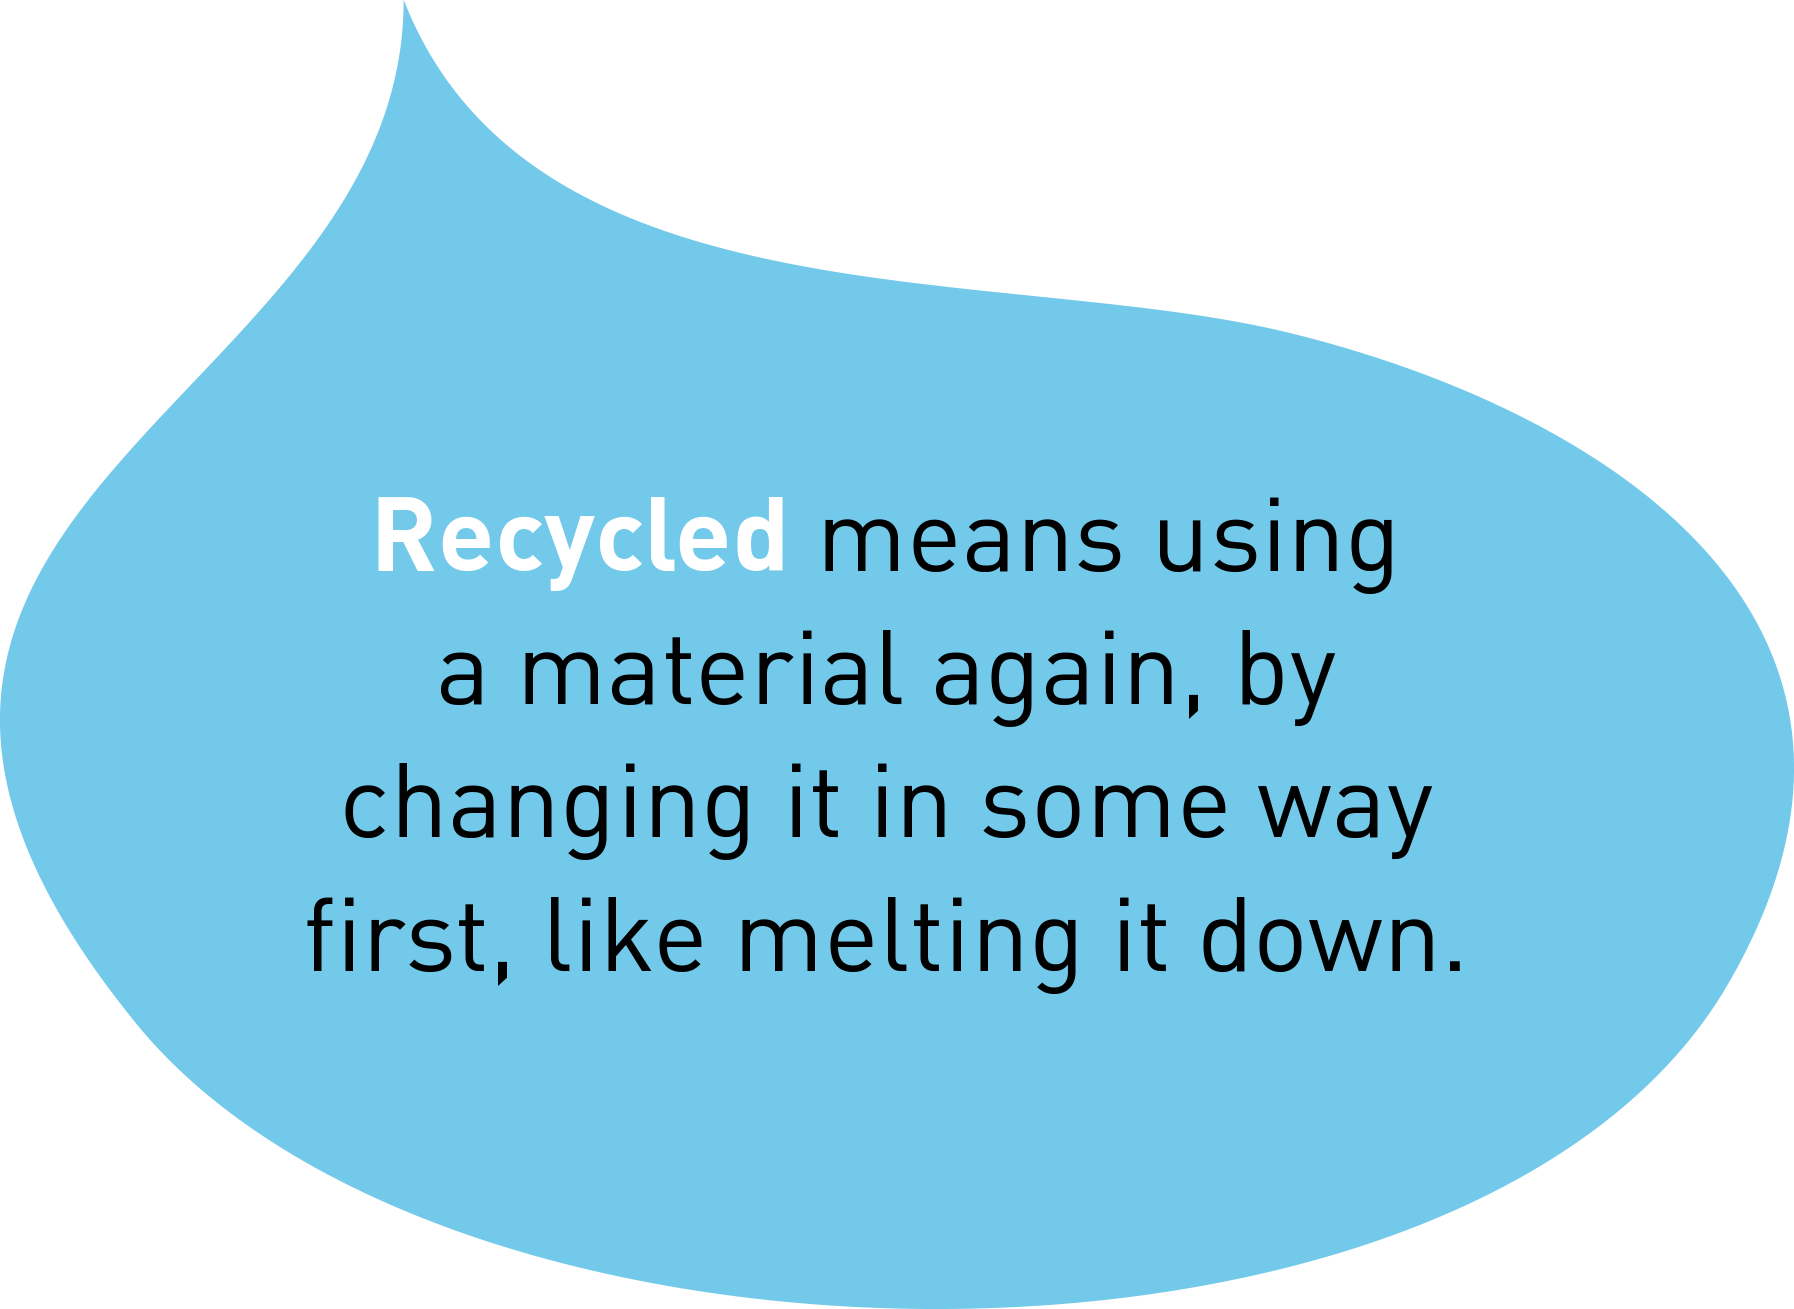 Recycled means using a material again, by changing it in some way first, like melting it down.